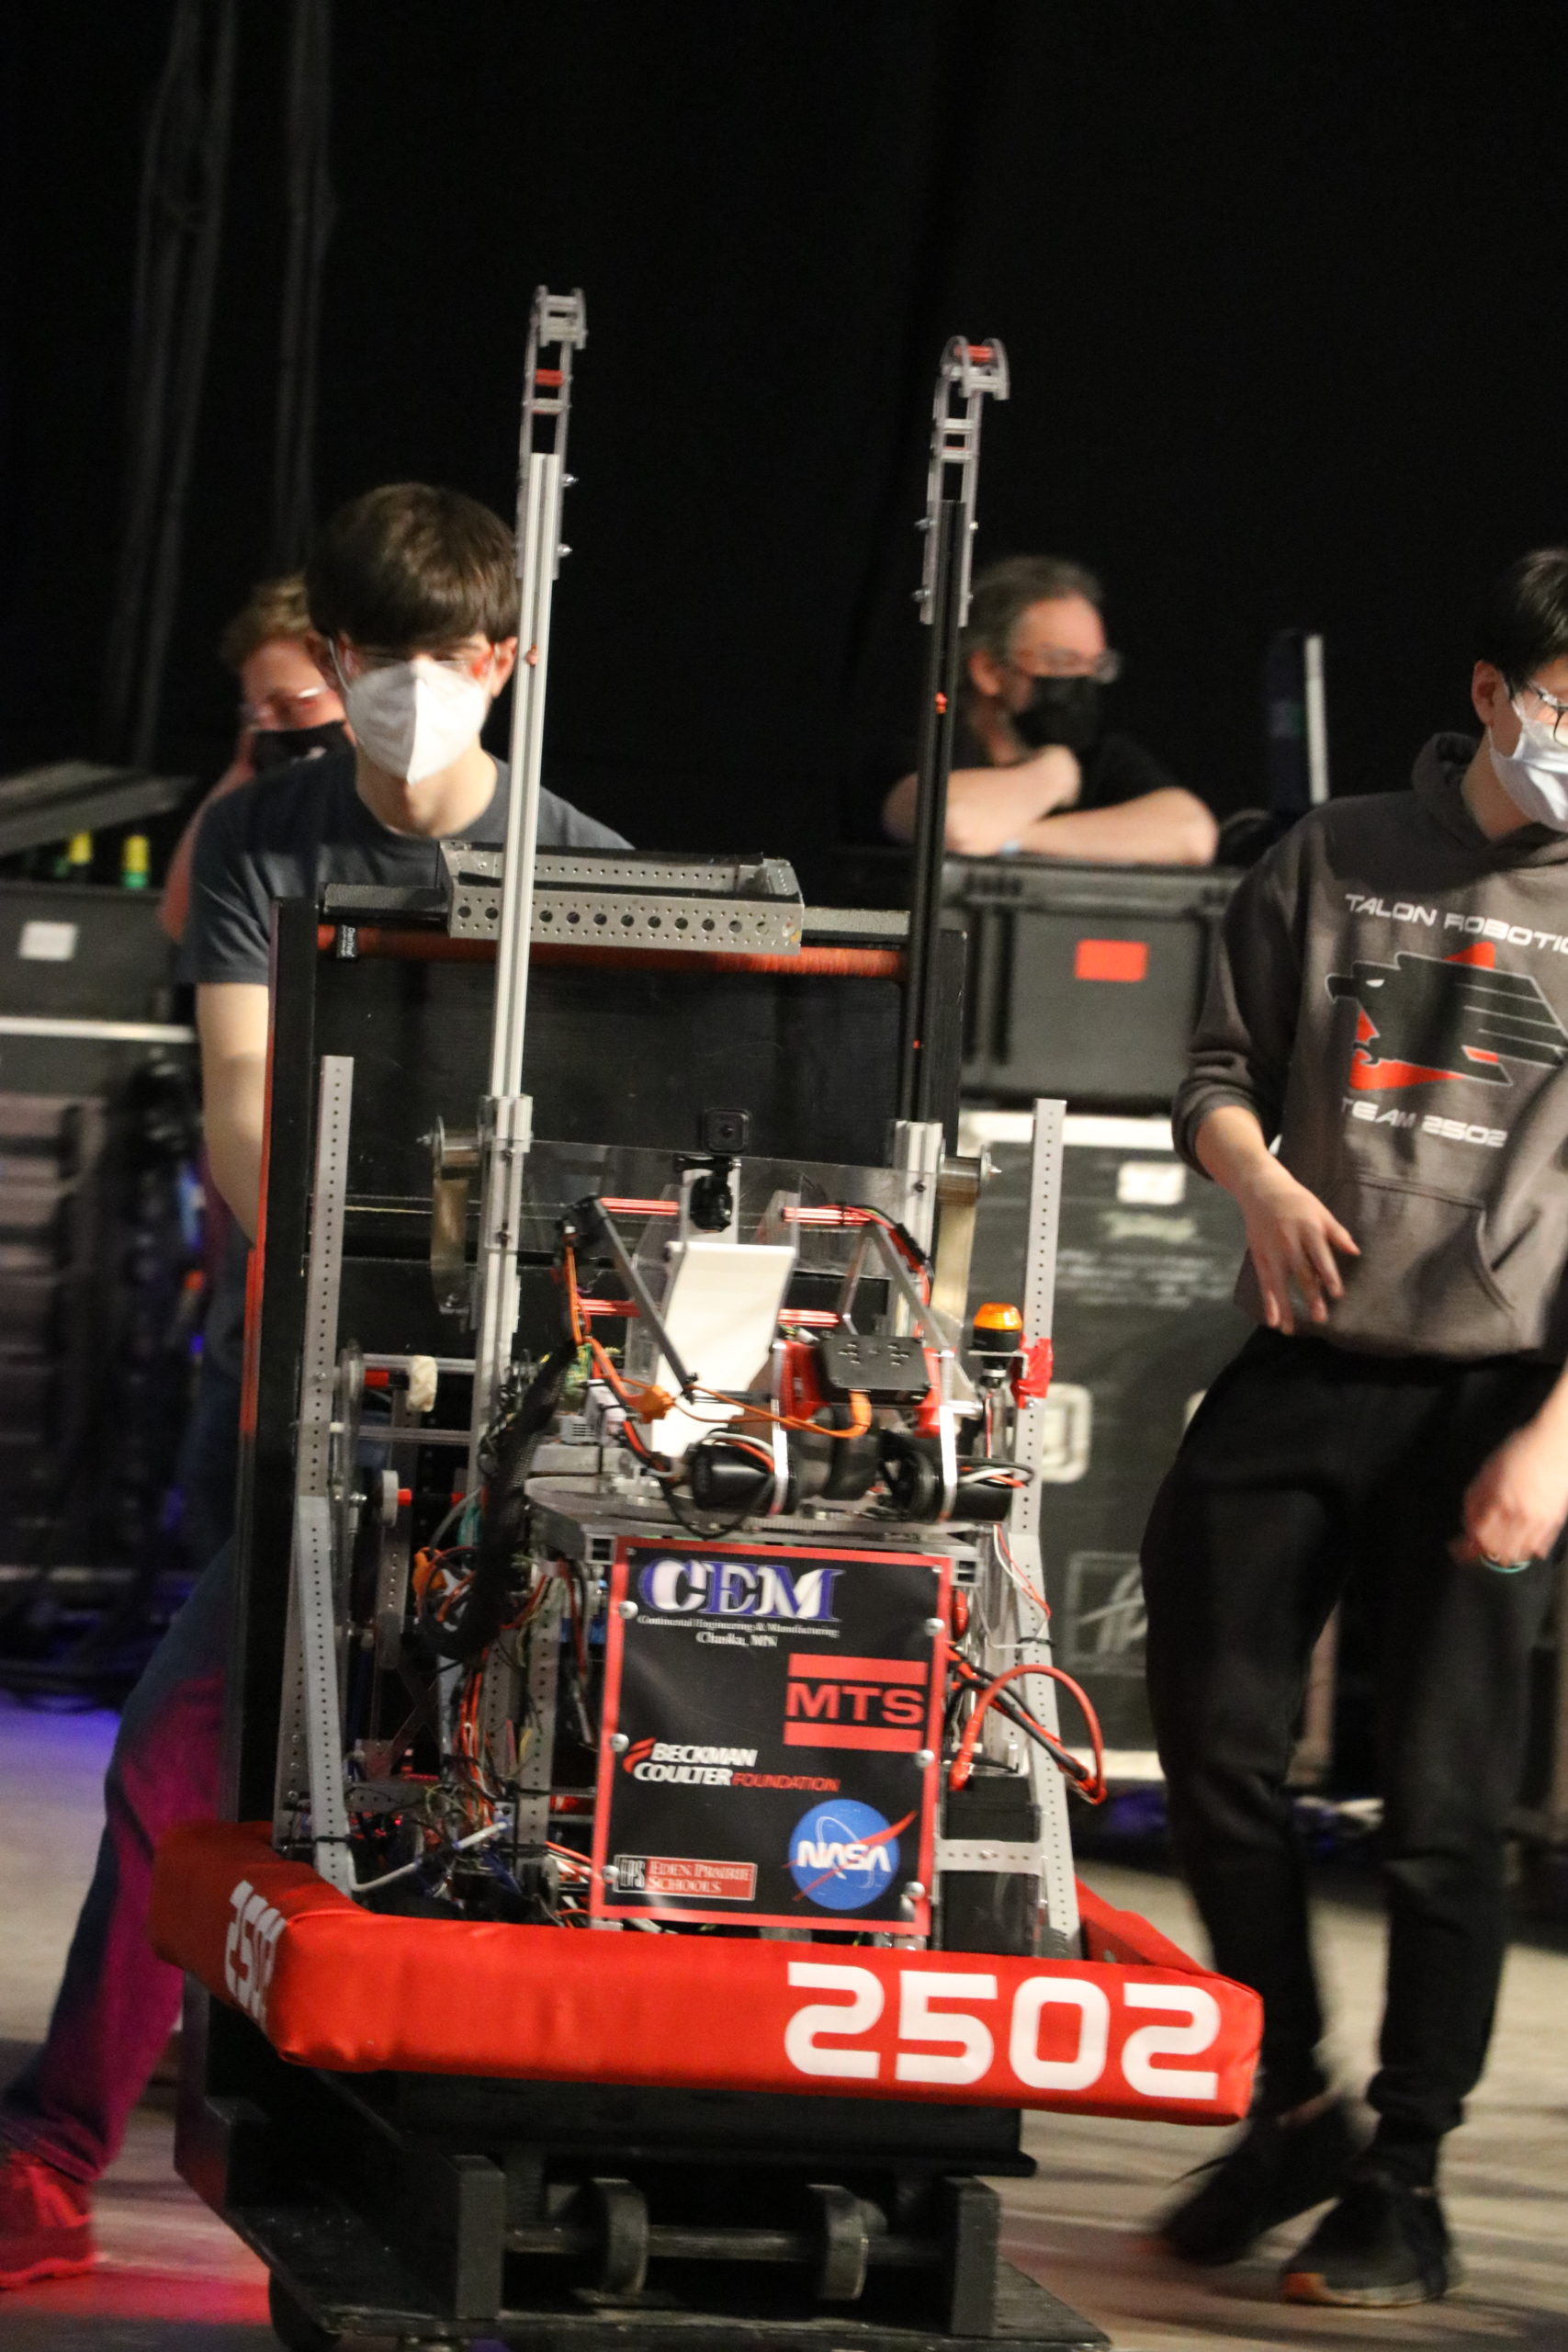 Our drive team moving the robot off of the field.